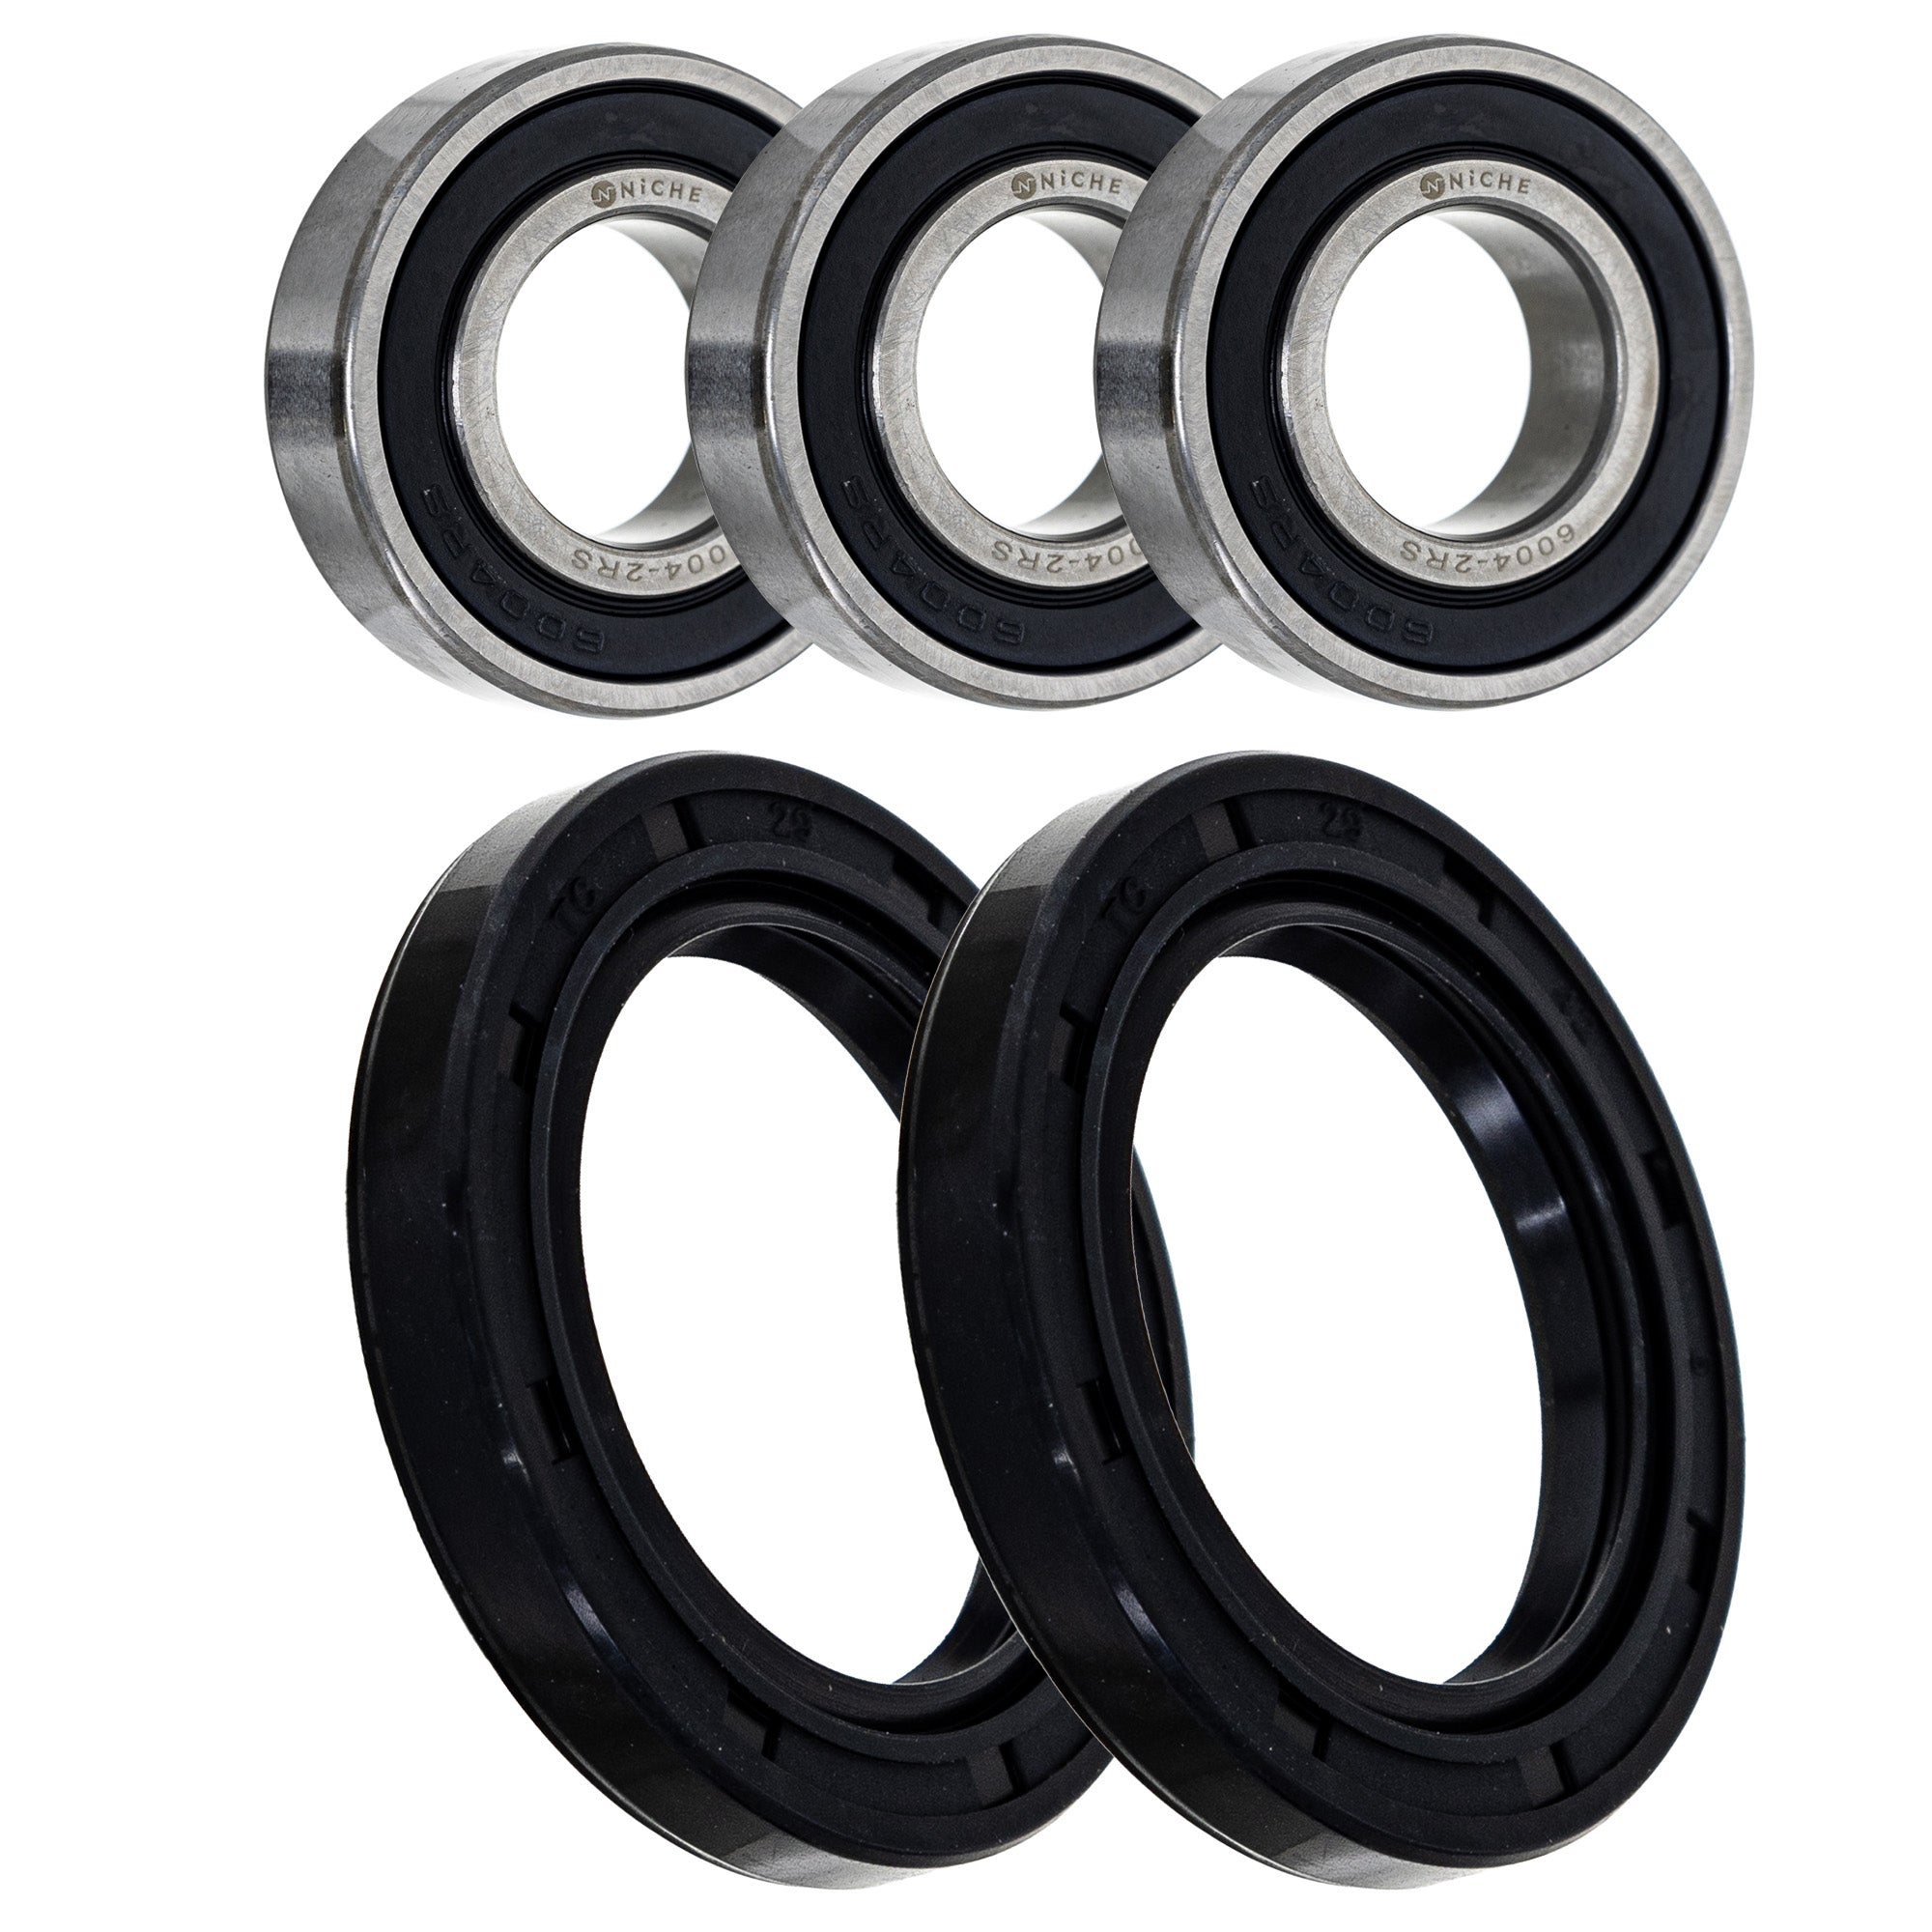 Wheel Bearing Seal Kit for zOTHER Ref No RM250 RM125 NICHE MK1009130